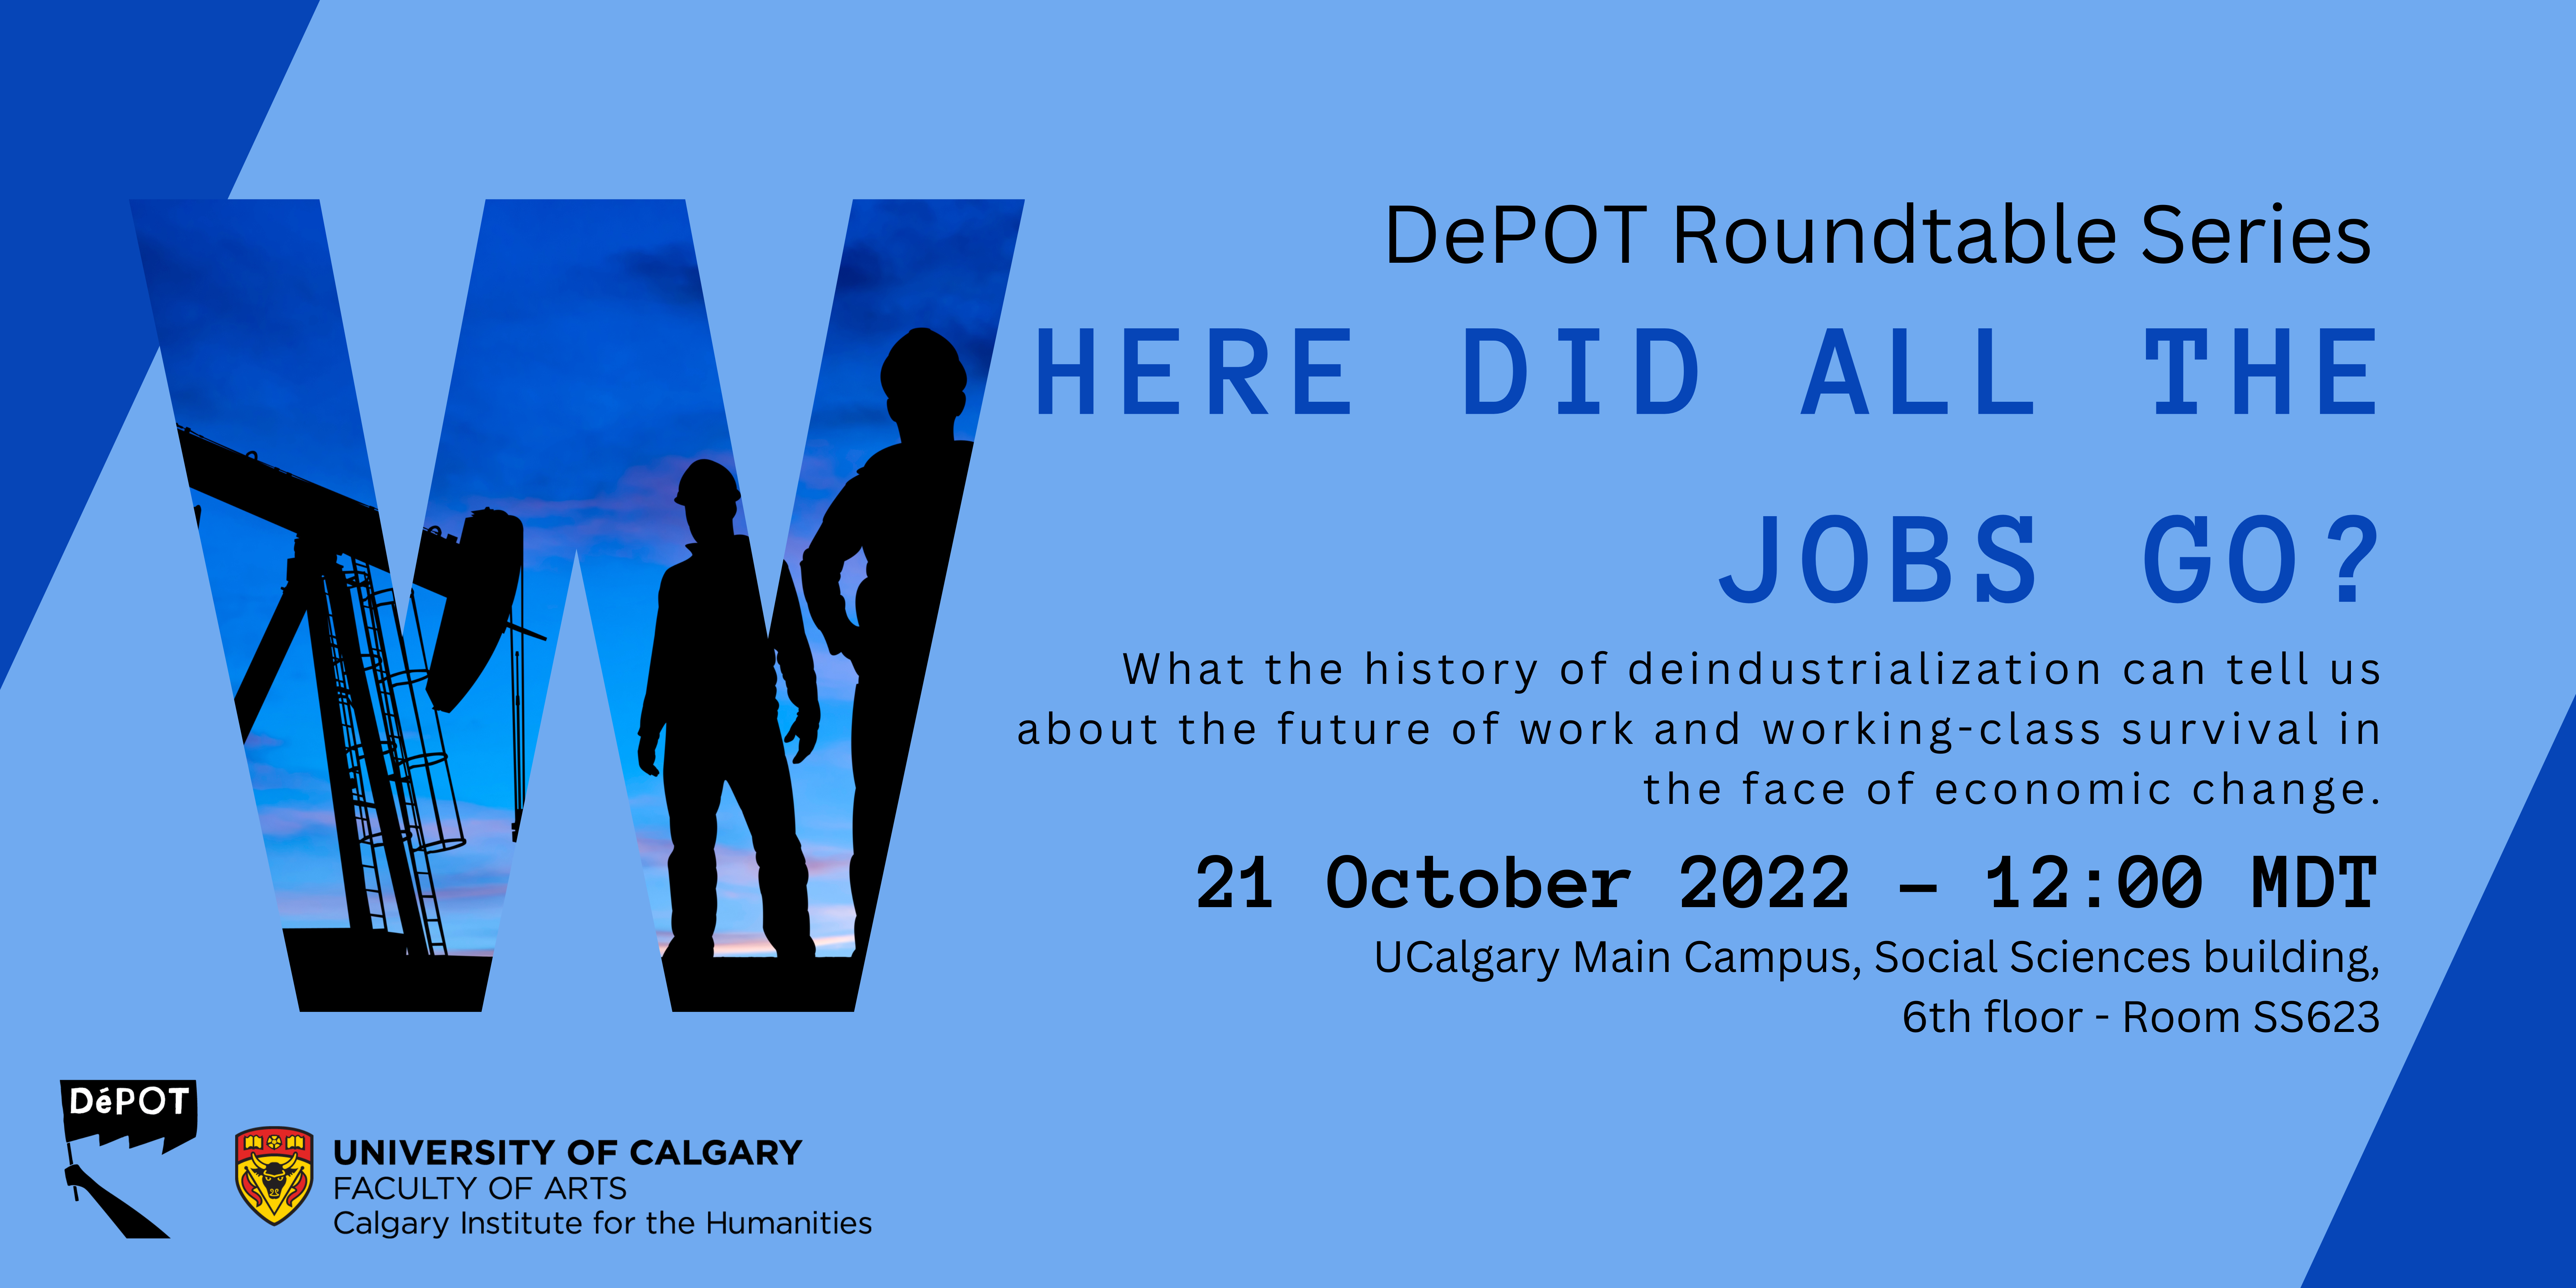 Poster for the event "Where Did All The Jobs Go? What the history of deindustrialization can tell us about the future of work and working-class survival in the face of economic change," happening October 21 2022 at 12:00 MDT, UCalgary Main Campus, Social Sciences building, 6th floor - Room SS623.